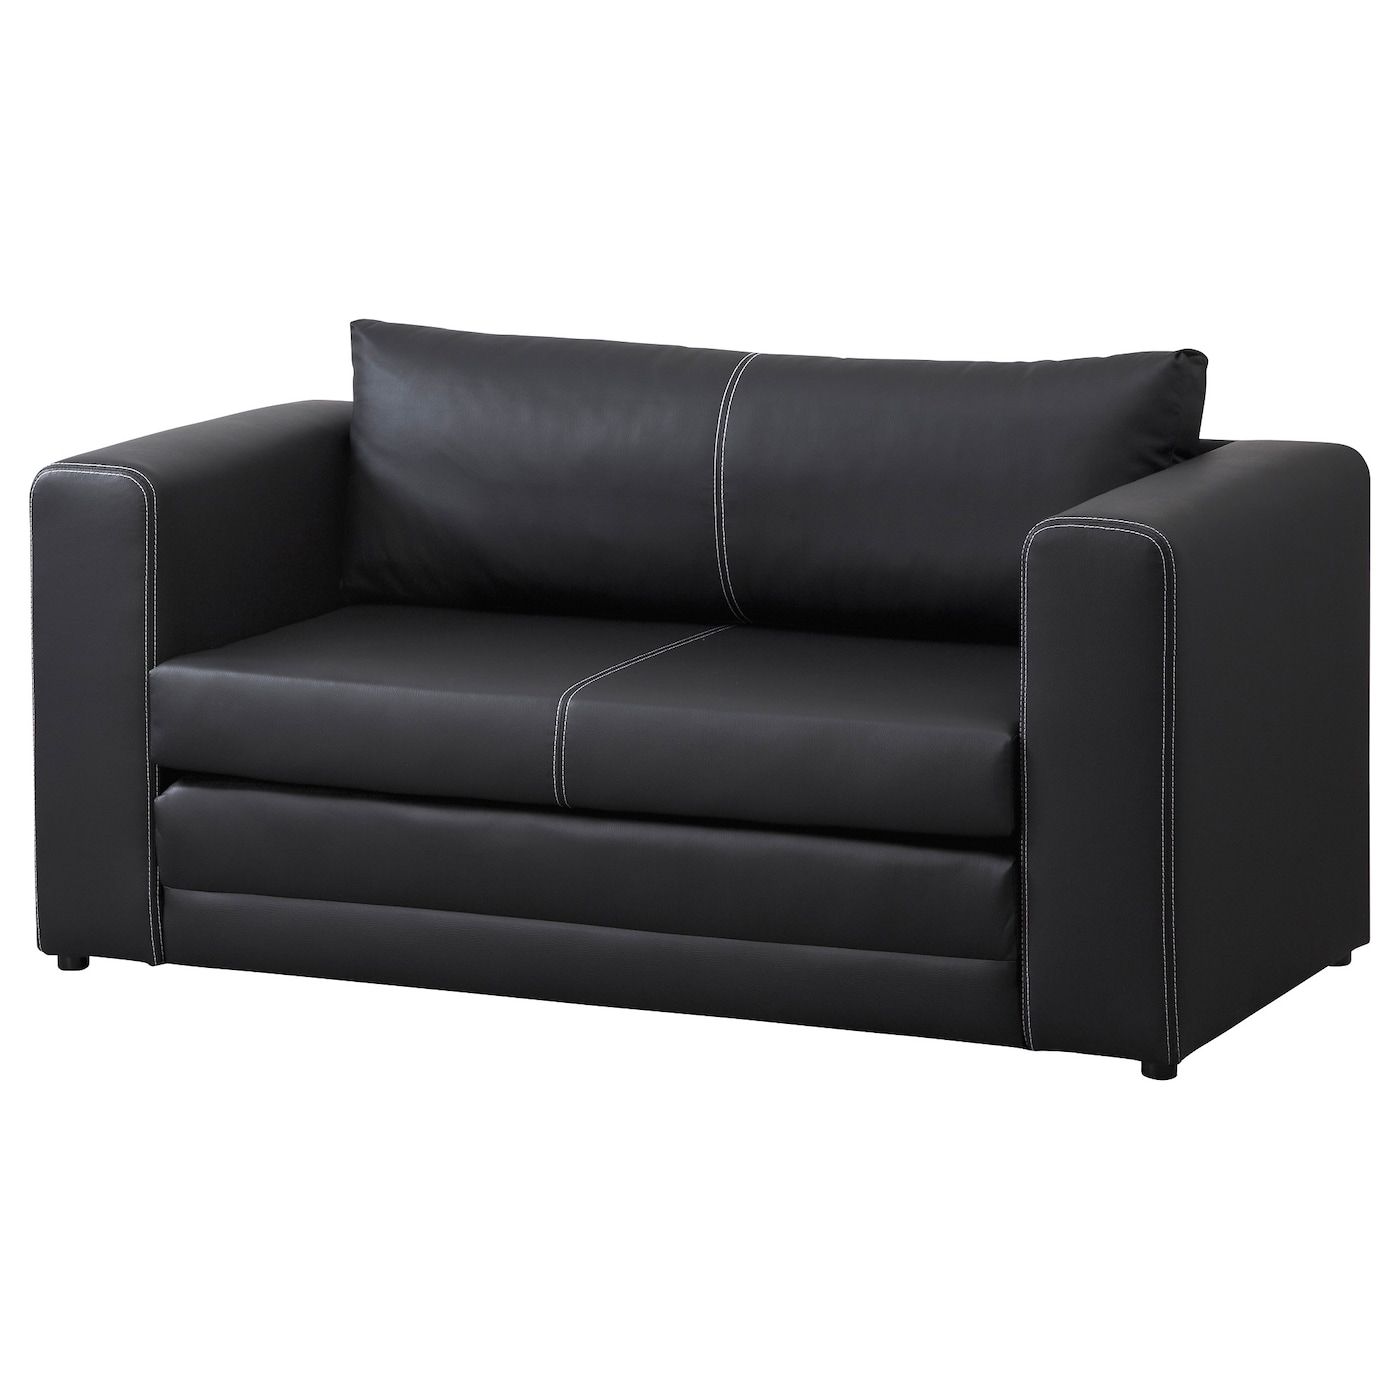 Askeby Black, Two Seat Sofa Bed – Ikea Pertaining To 2 Seater Black Velvet Sofa Beds (View 9 of 20)